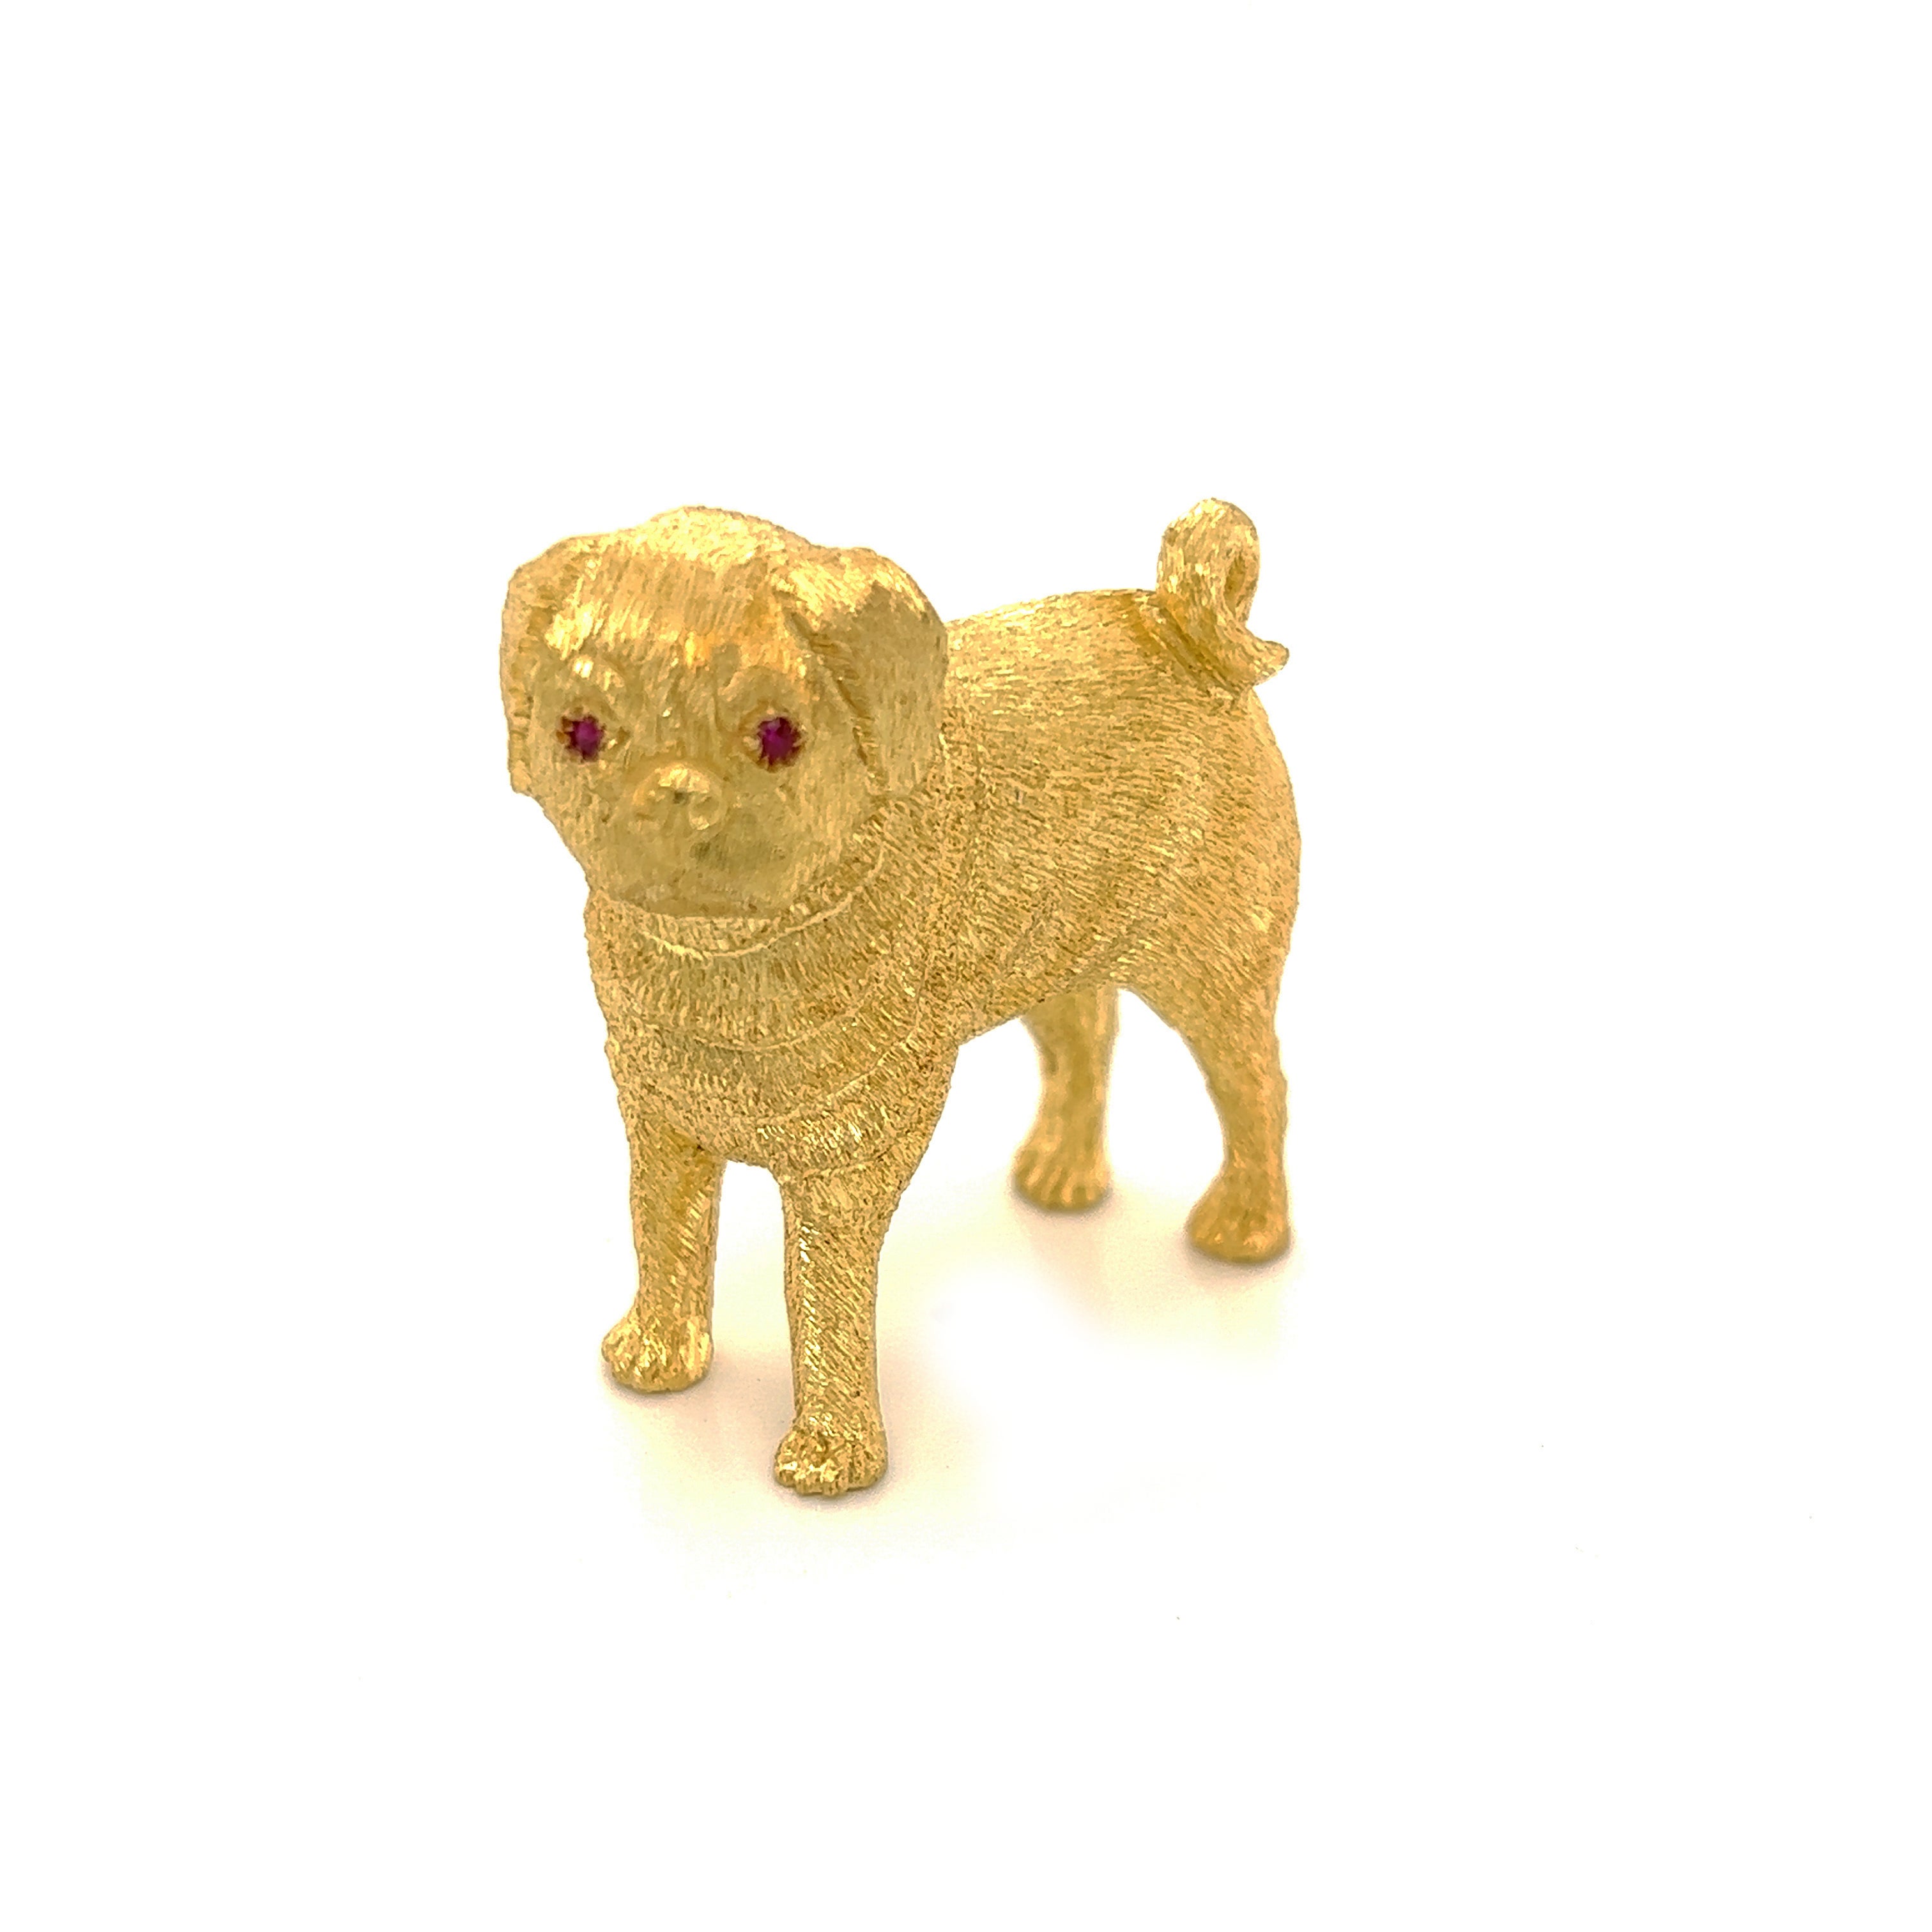 Solid 3D Full Figure Standing Pug Dog 18k Yellow Gold Brooch For Sale